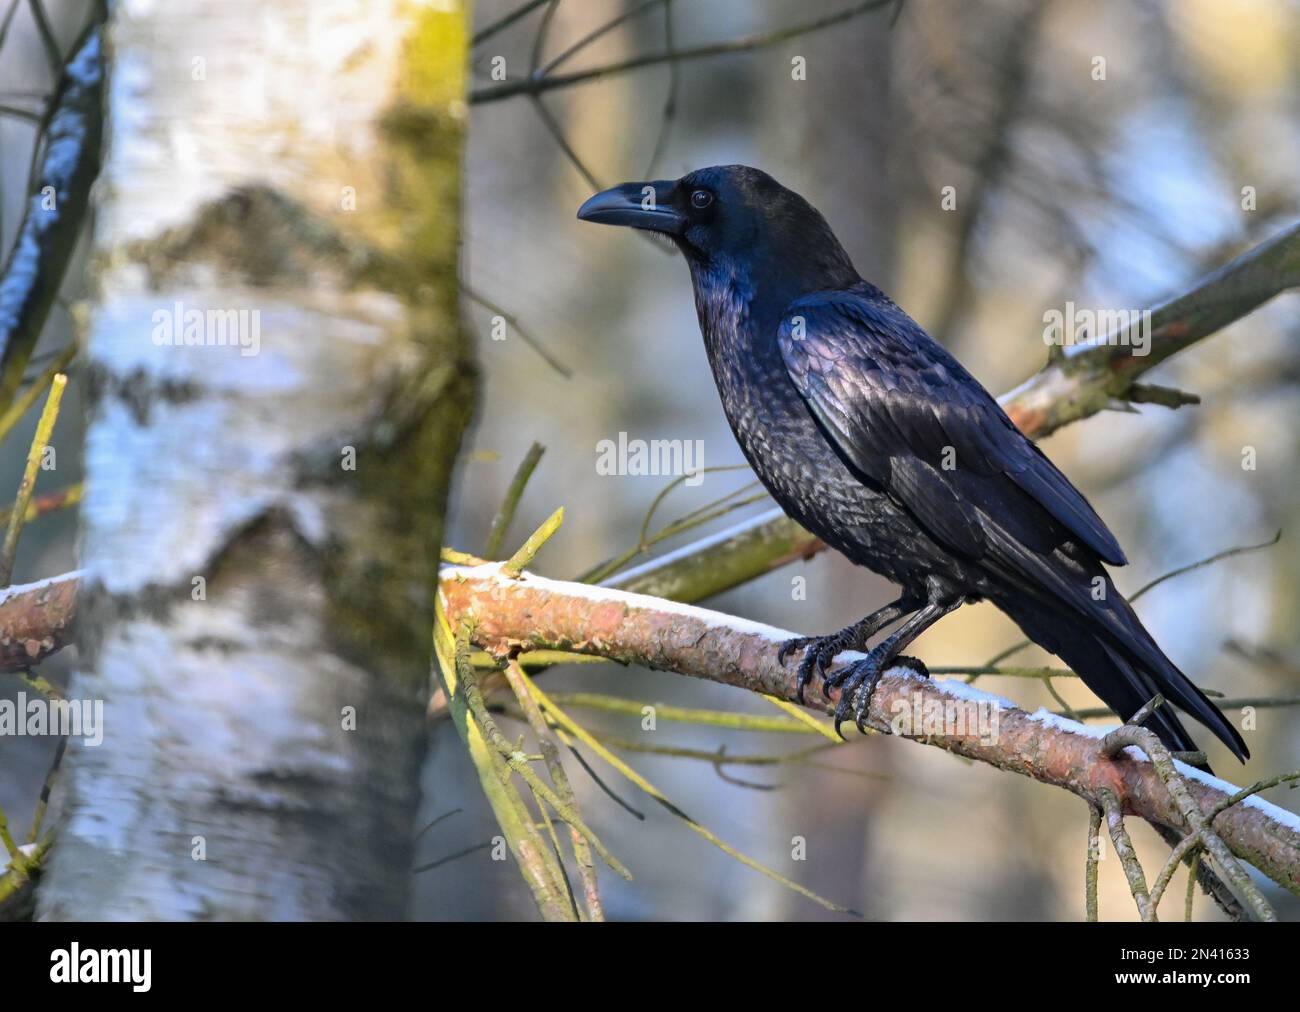 07 February 2023, Brandenburg, Groß Schönebeck: A common raven (Corvus corax) is seen perched on a branch in a forest in Schorfheide Wildlife Park. Common ravens are the largest of the corvids. The game park is home exclusively to wildlife species that are or were native to Schorfheide, such as otter, bison, red deer, fallow deer, wild boar, mouflon, wolf, elk and Przewalski's horse. The park covers an area of about 100 hectares and has a 7-kilometer trail system. Photo: Patrick Pleul/dpa/ZB Stock Photo